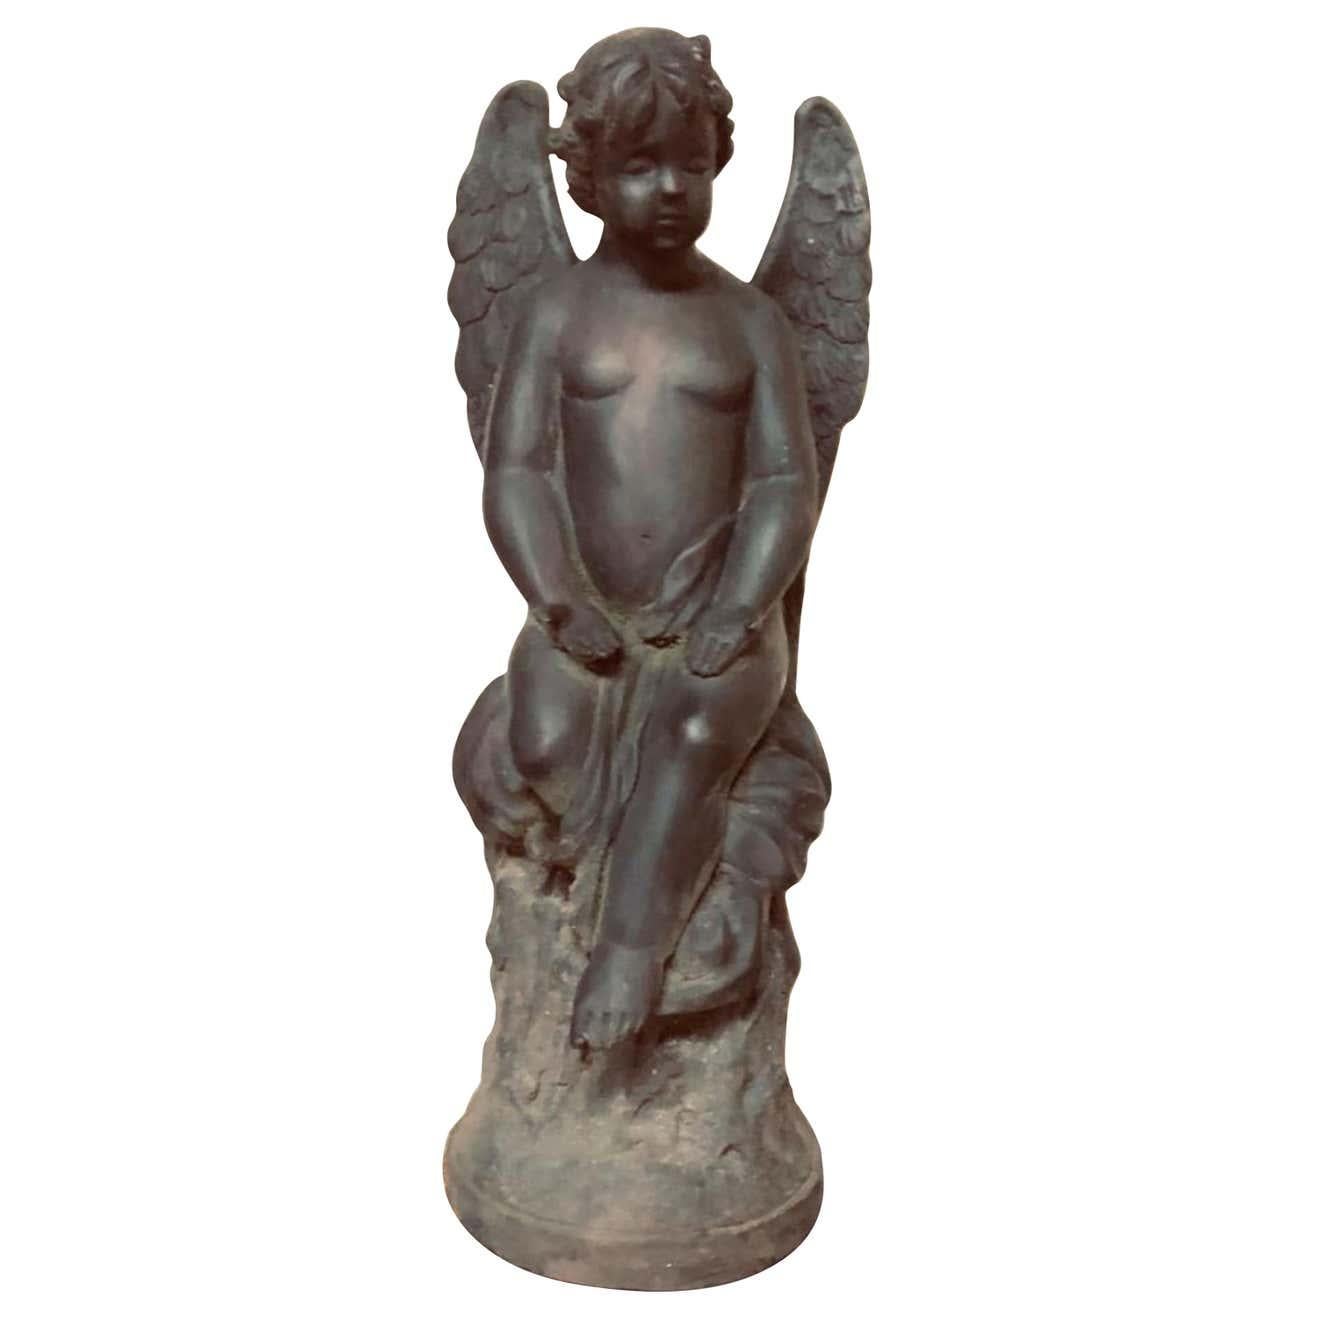 A beautiful 19th century large bronze angel with wonderfully aged patina. Perfect as garden furniture or home decoration.